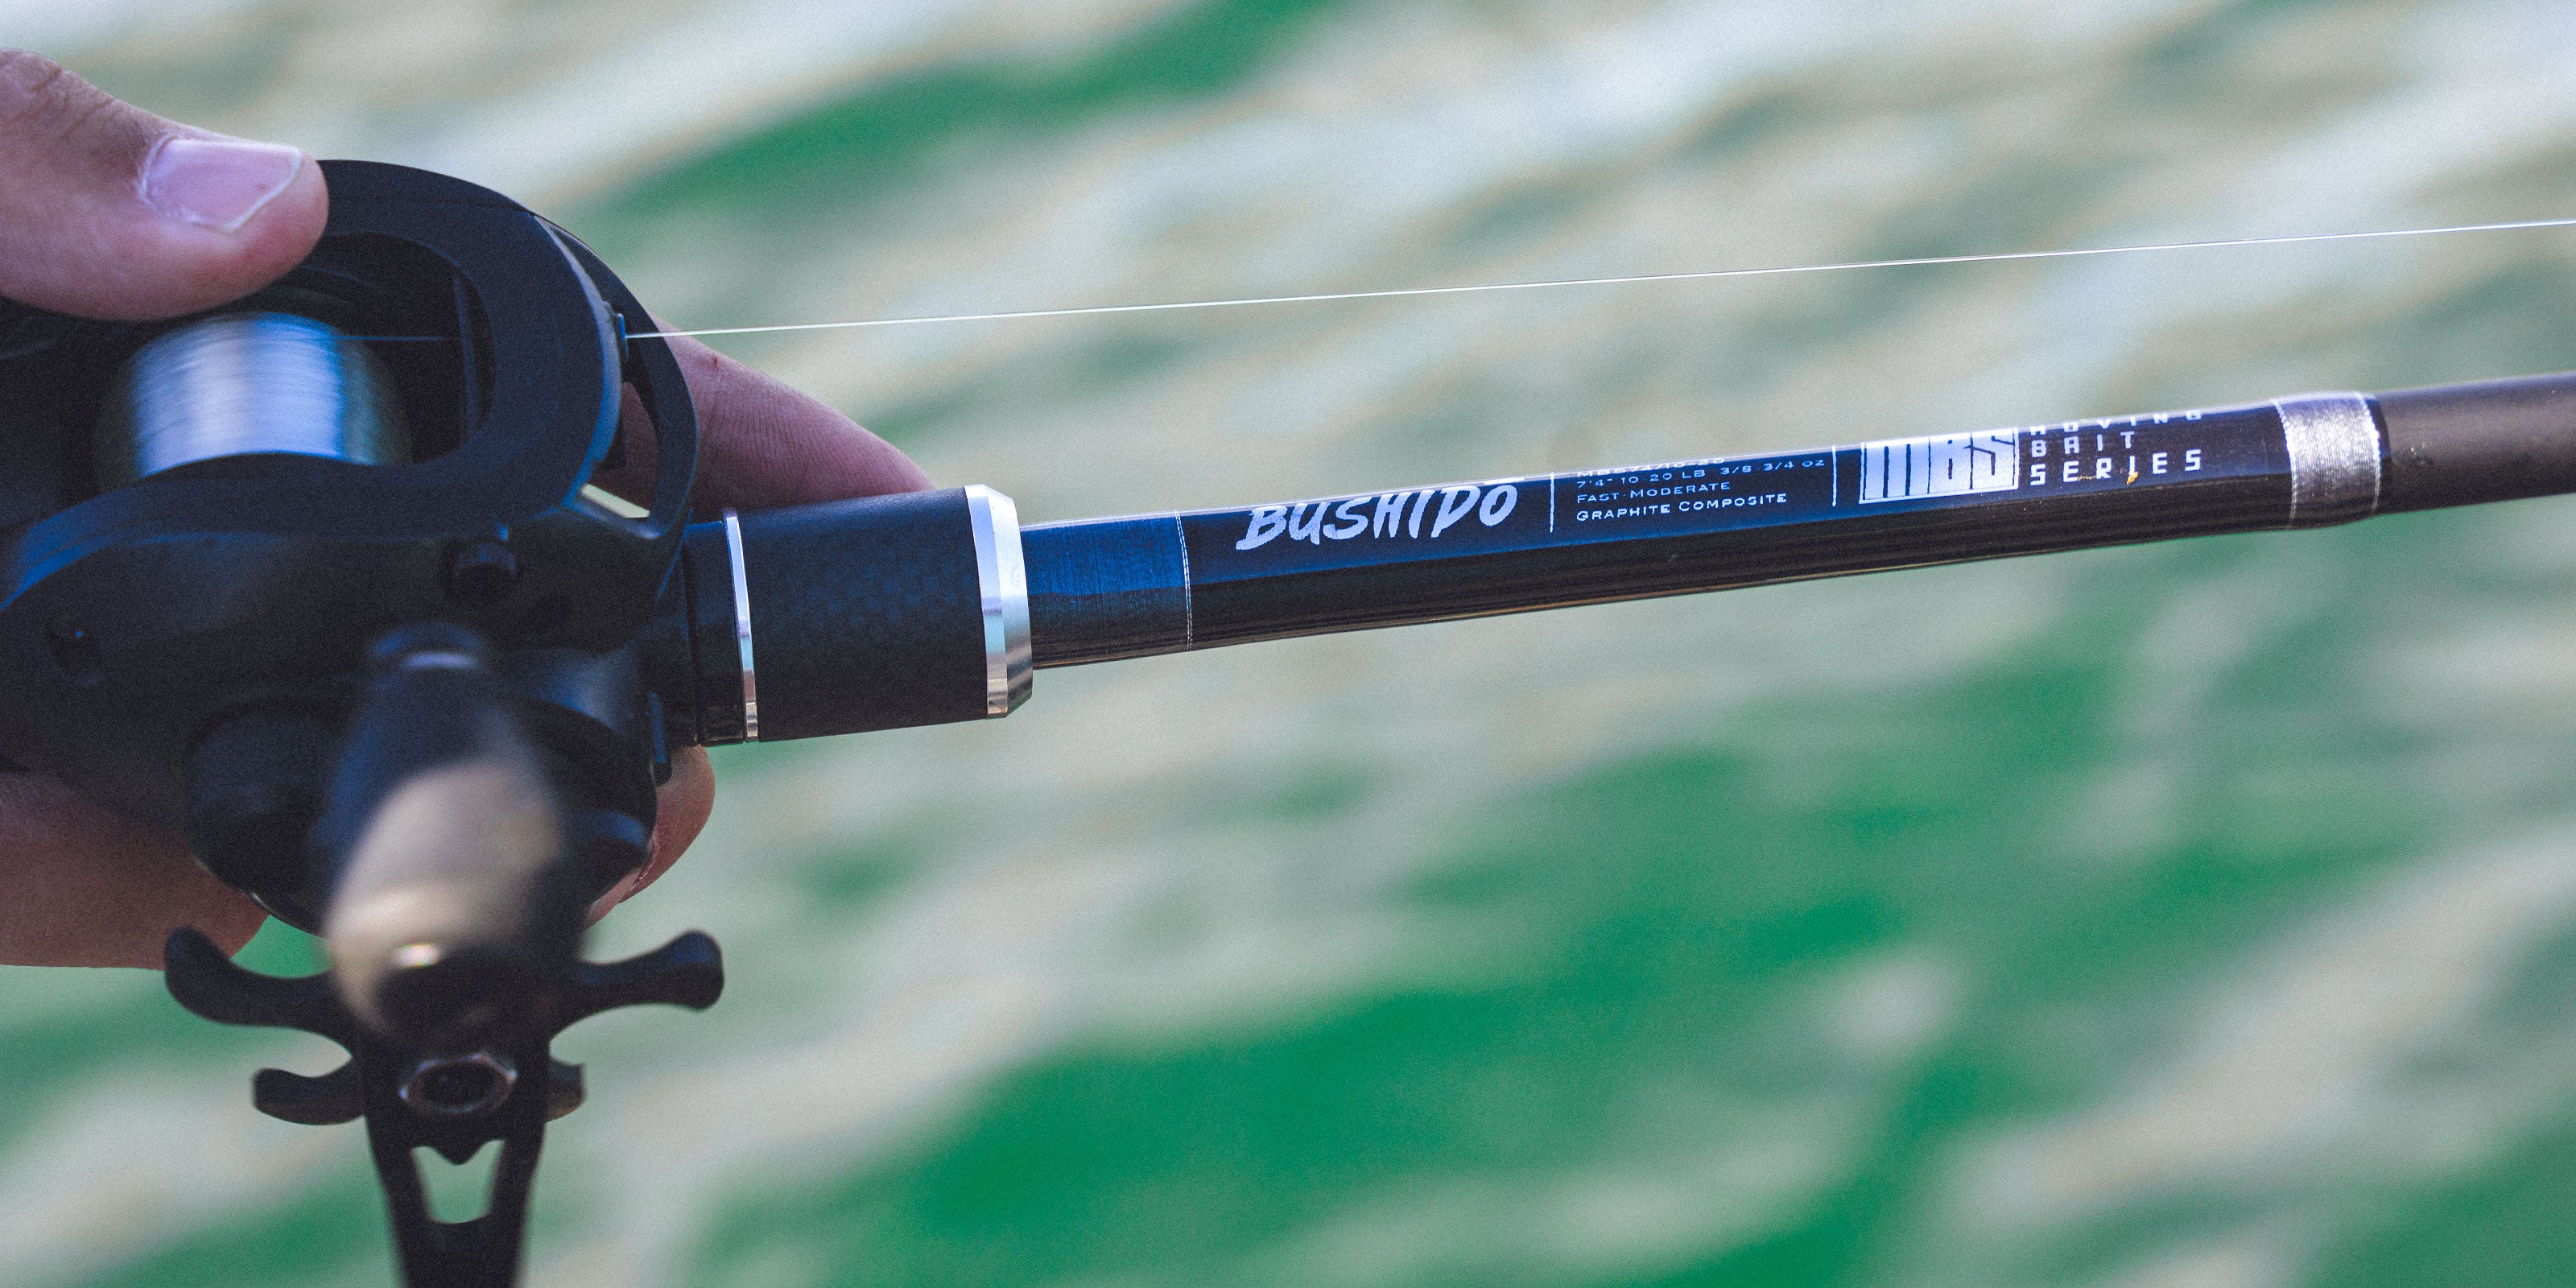 2.5 Series 6'6 ML 2 Pc. Spinning Rod & Size 20 Reel